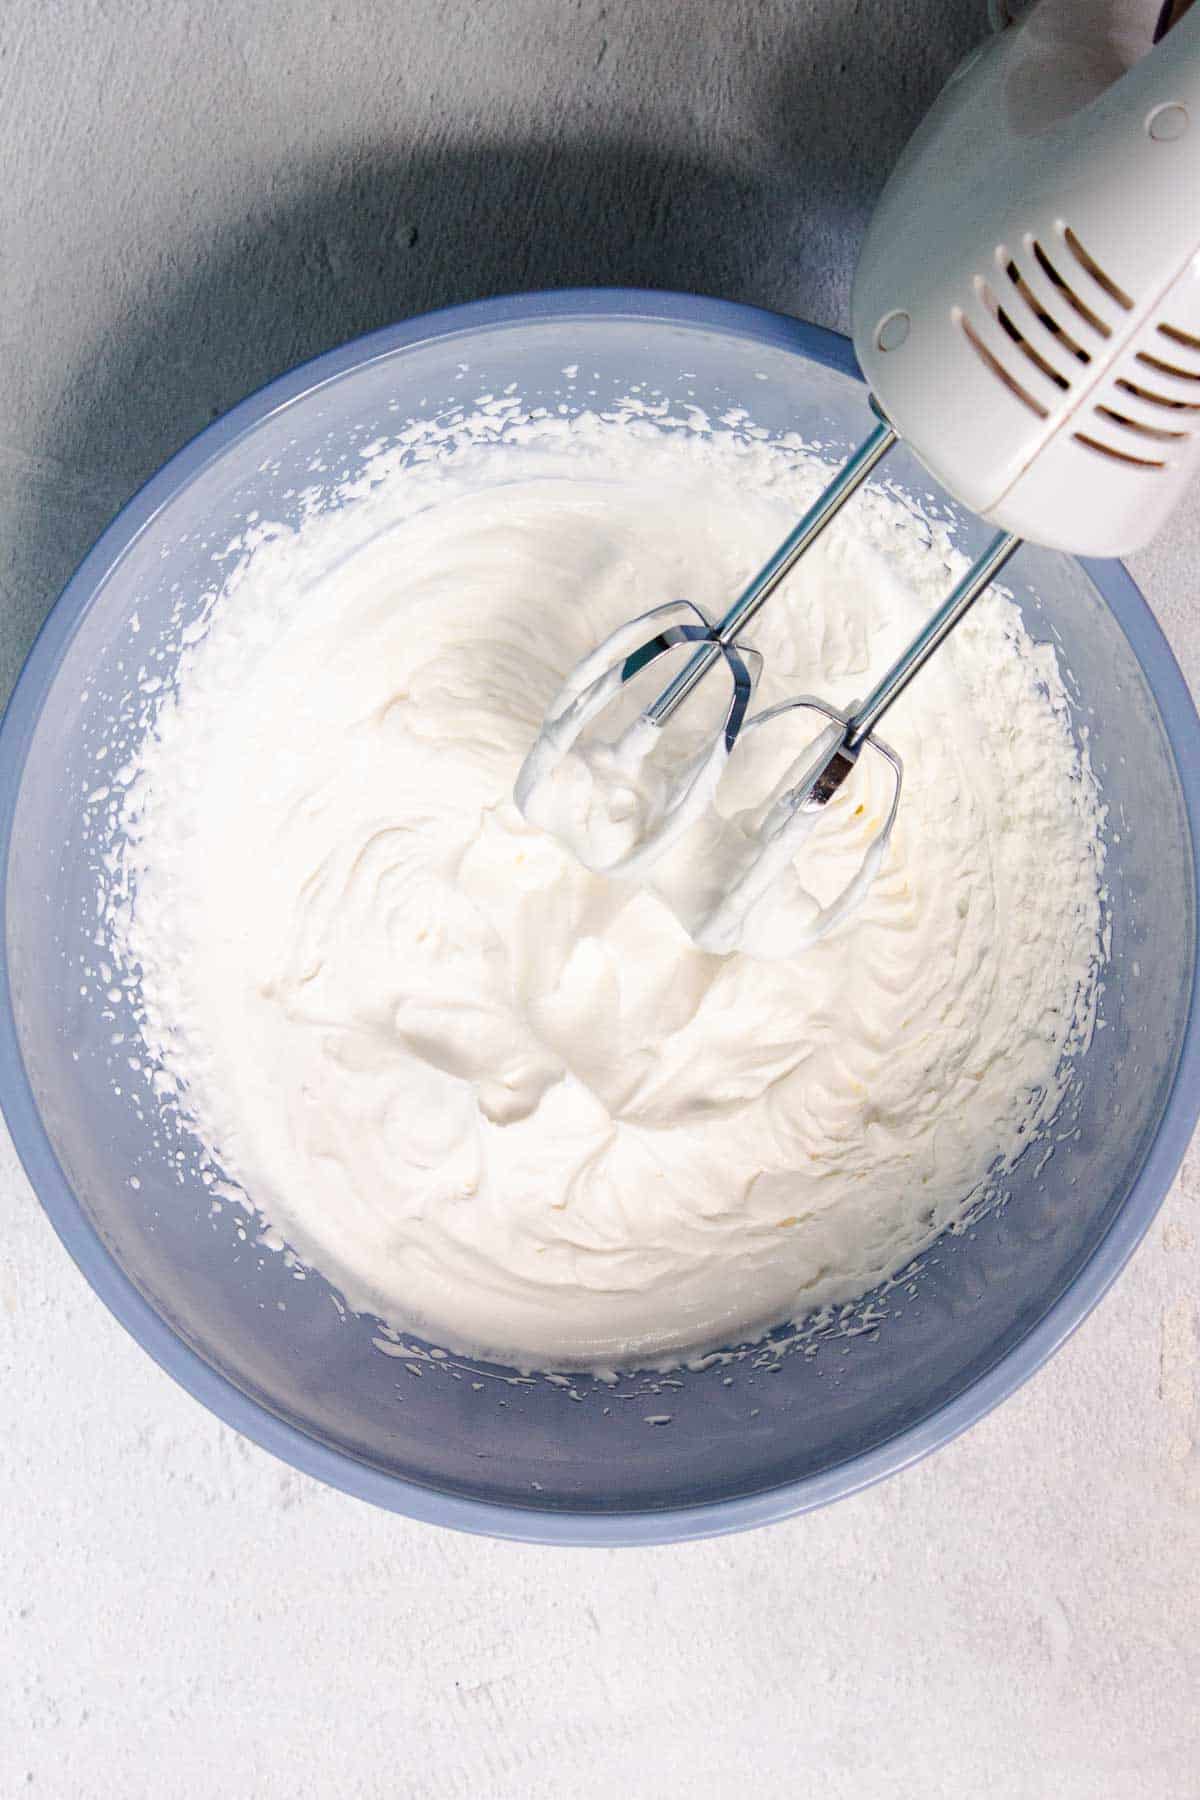 The heavy cream has been whipped with a hand mixer to create whipped cream